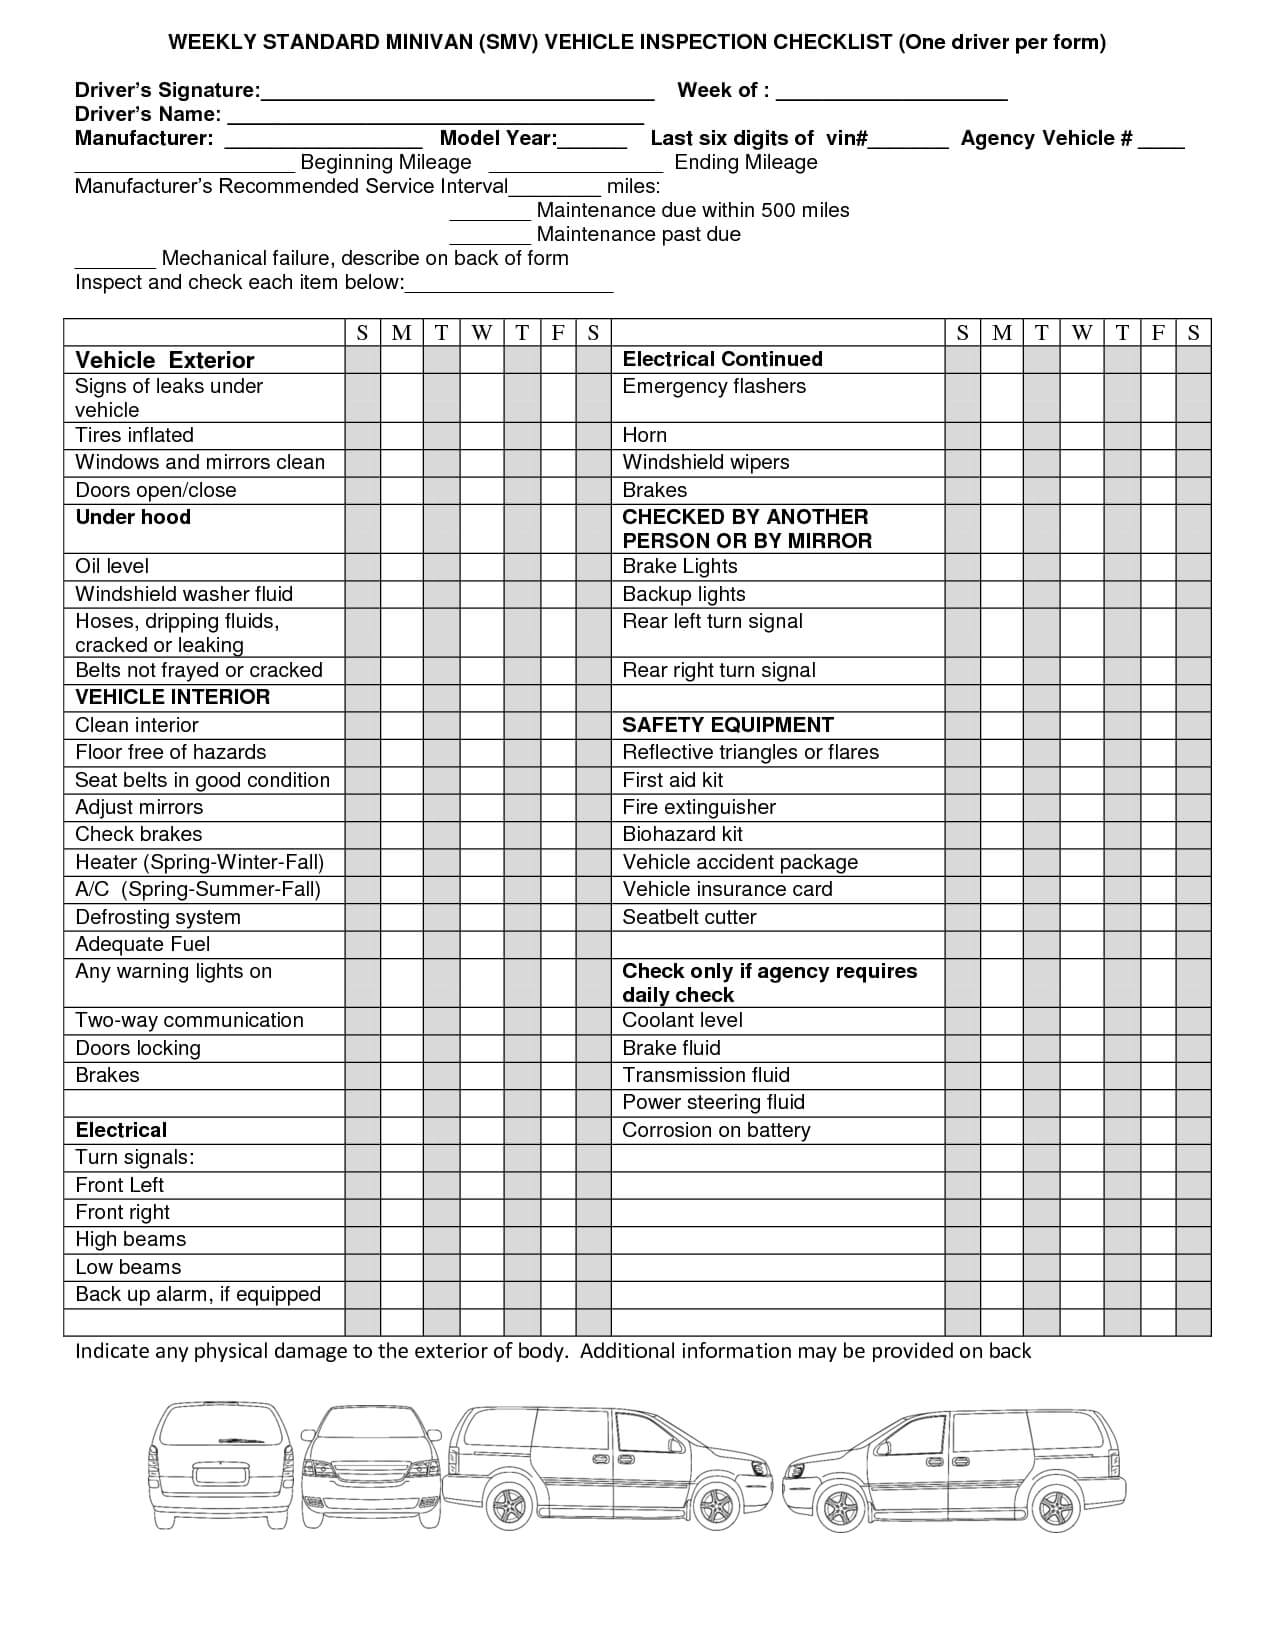 Weekly Vehicle Inspection Checklist Template | Vehicle Throughout Vehicle Checklist Template Word